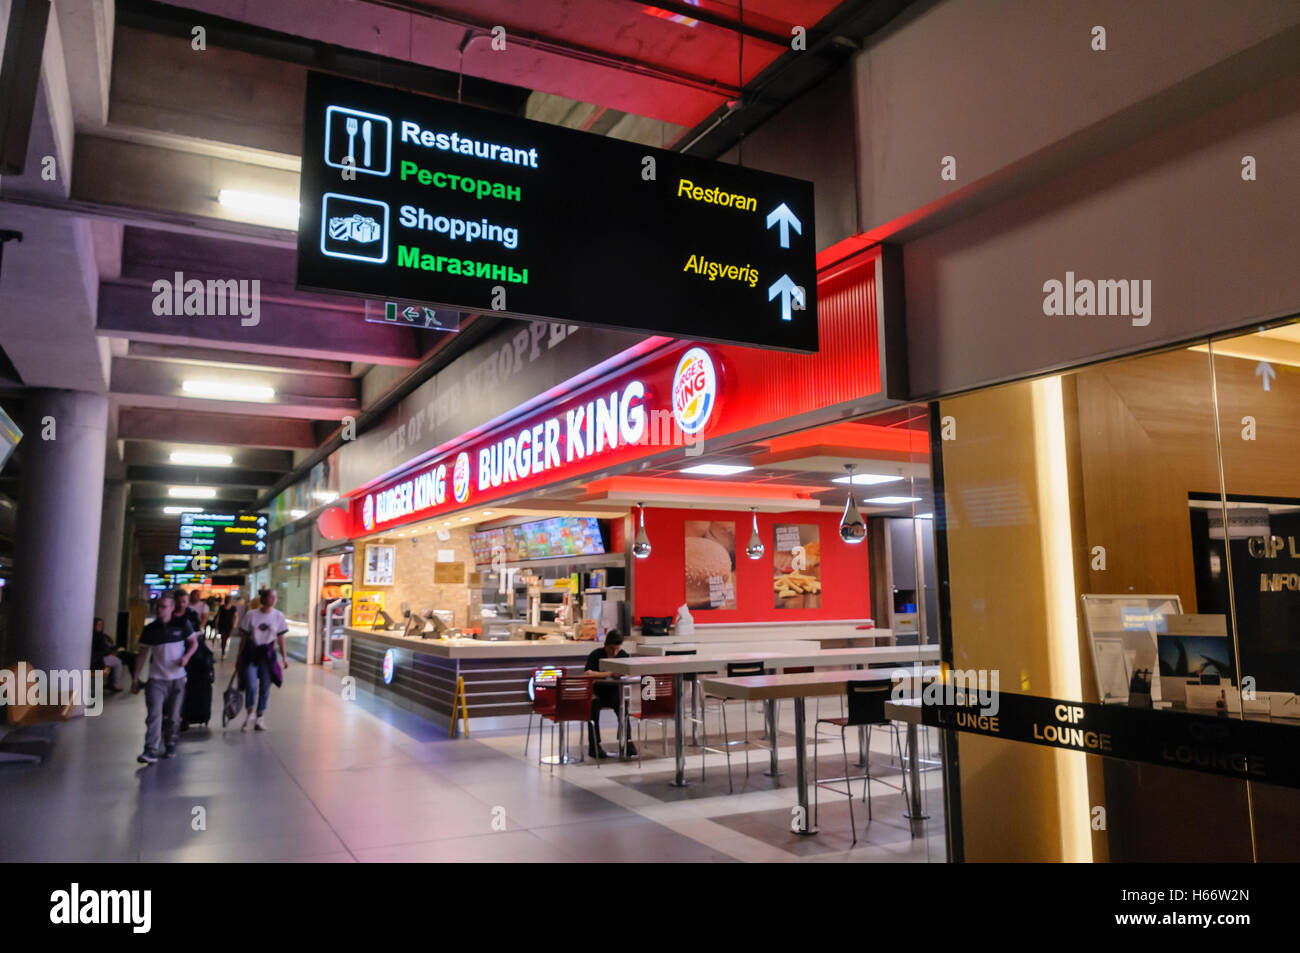 Burger King restaurant in an airport with signs in Turkish, English and Russian. Stock Photo